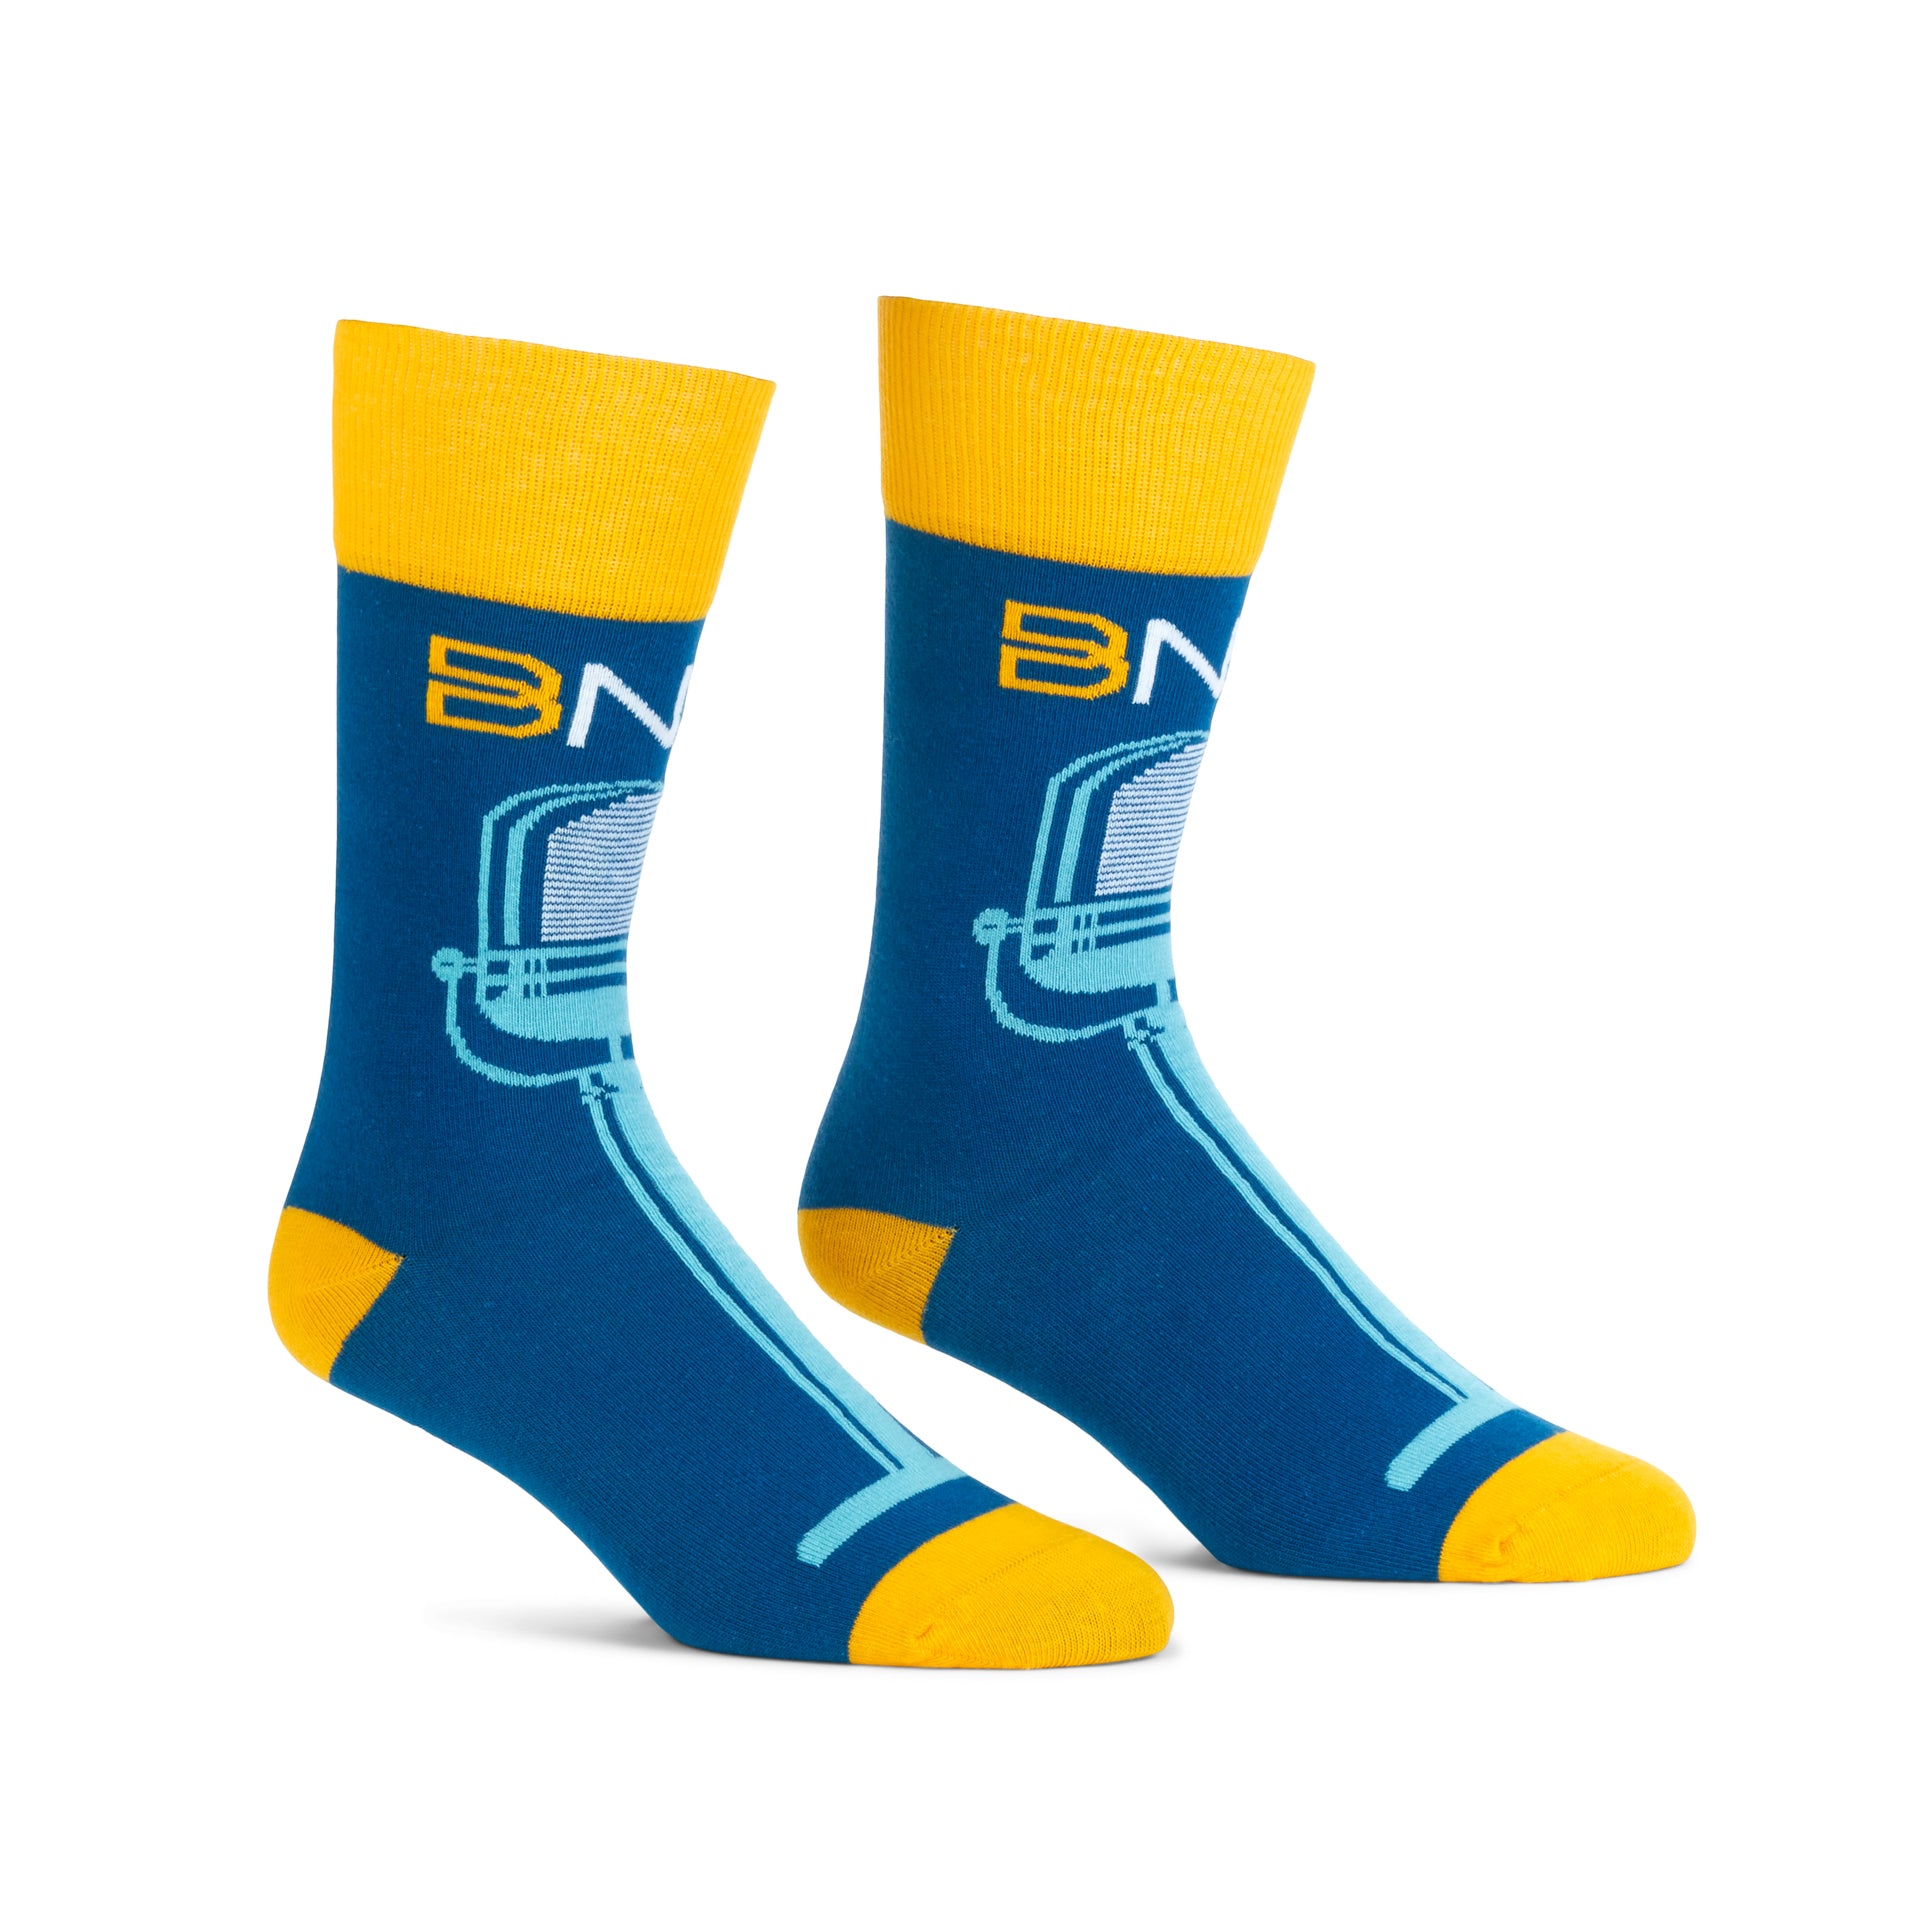 Side view of BNA Microphone Socks.  Dark blue socks with yellow cuffs, heels, and toes.  Features the BNA logo above a teal vintage microphone design vertically down the front of the socks.  BNA logo on the sole.